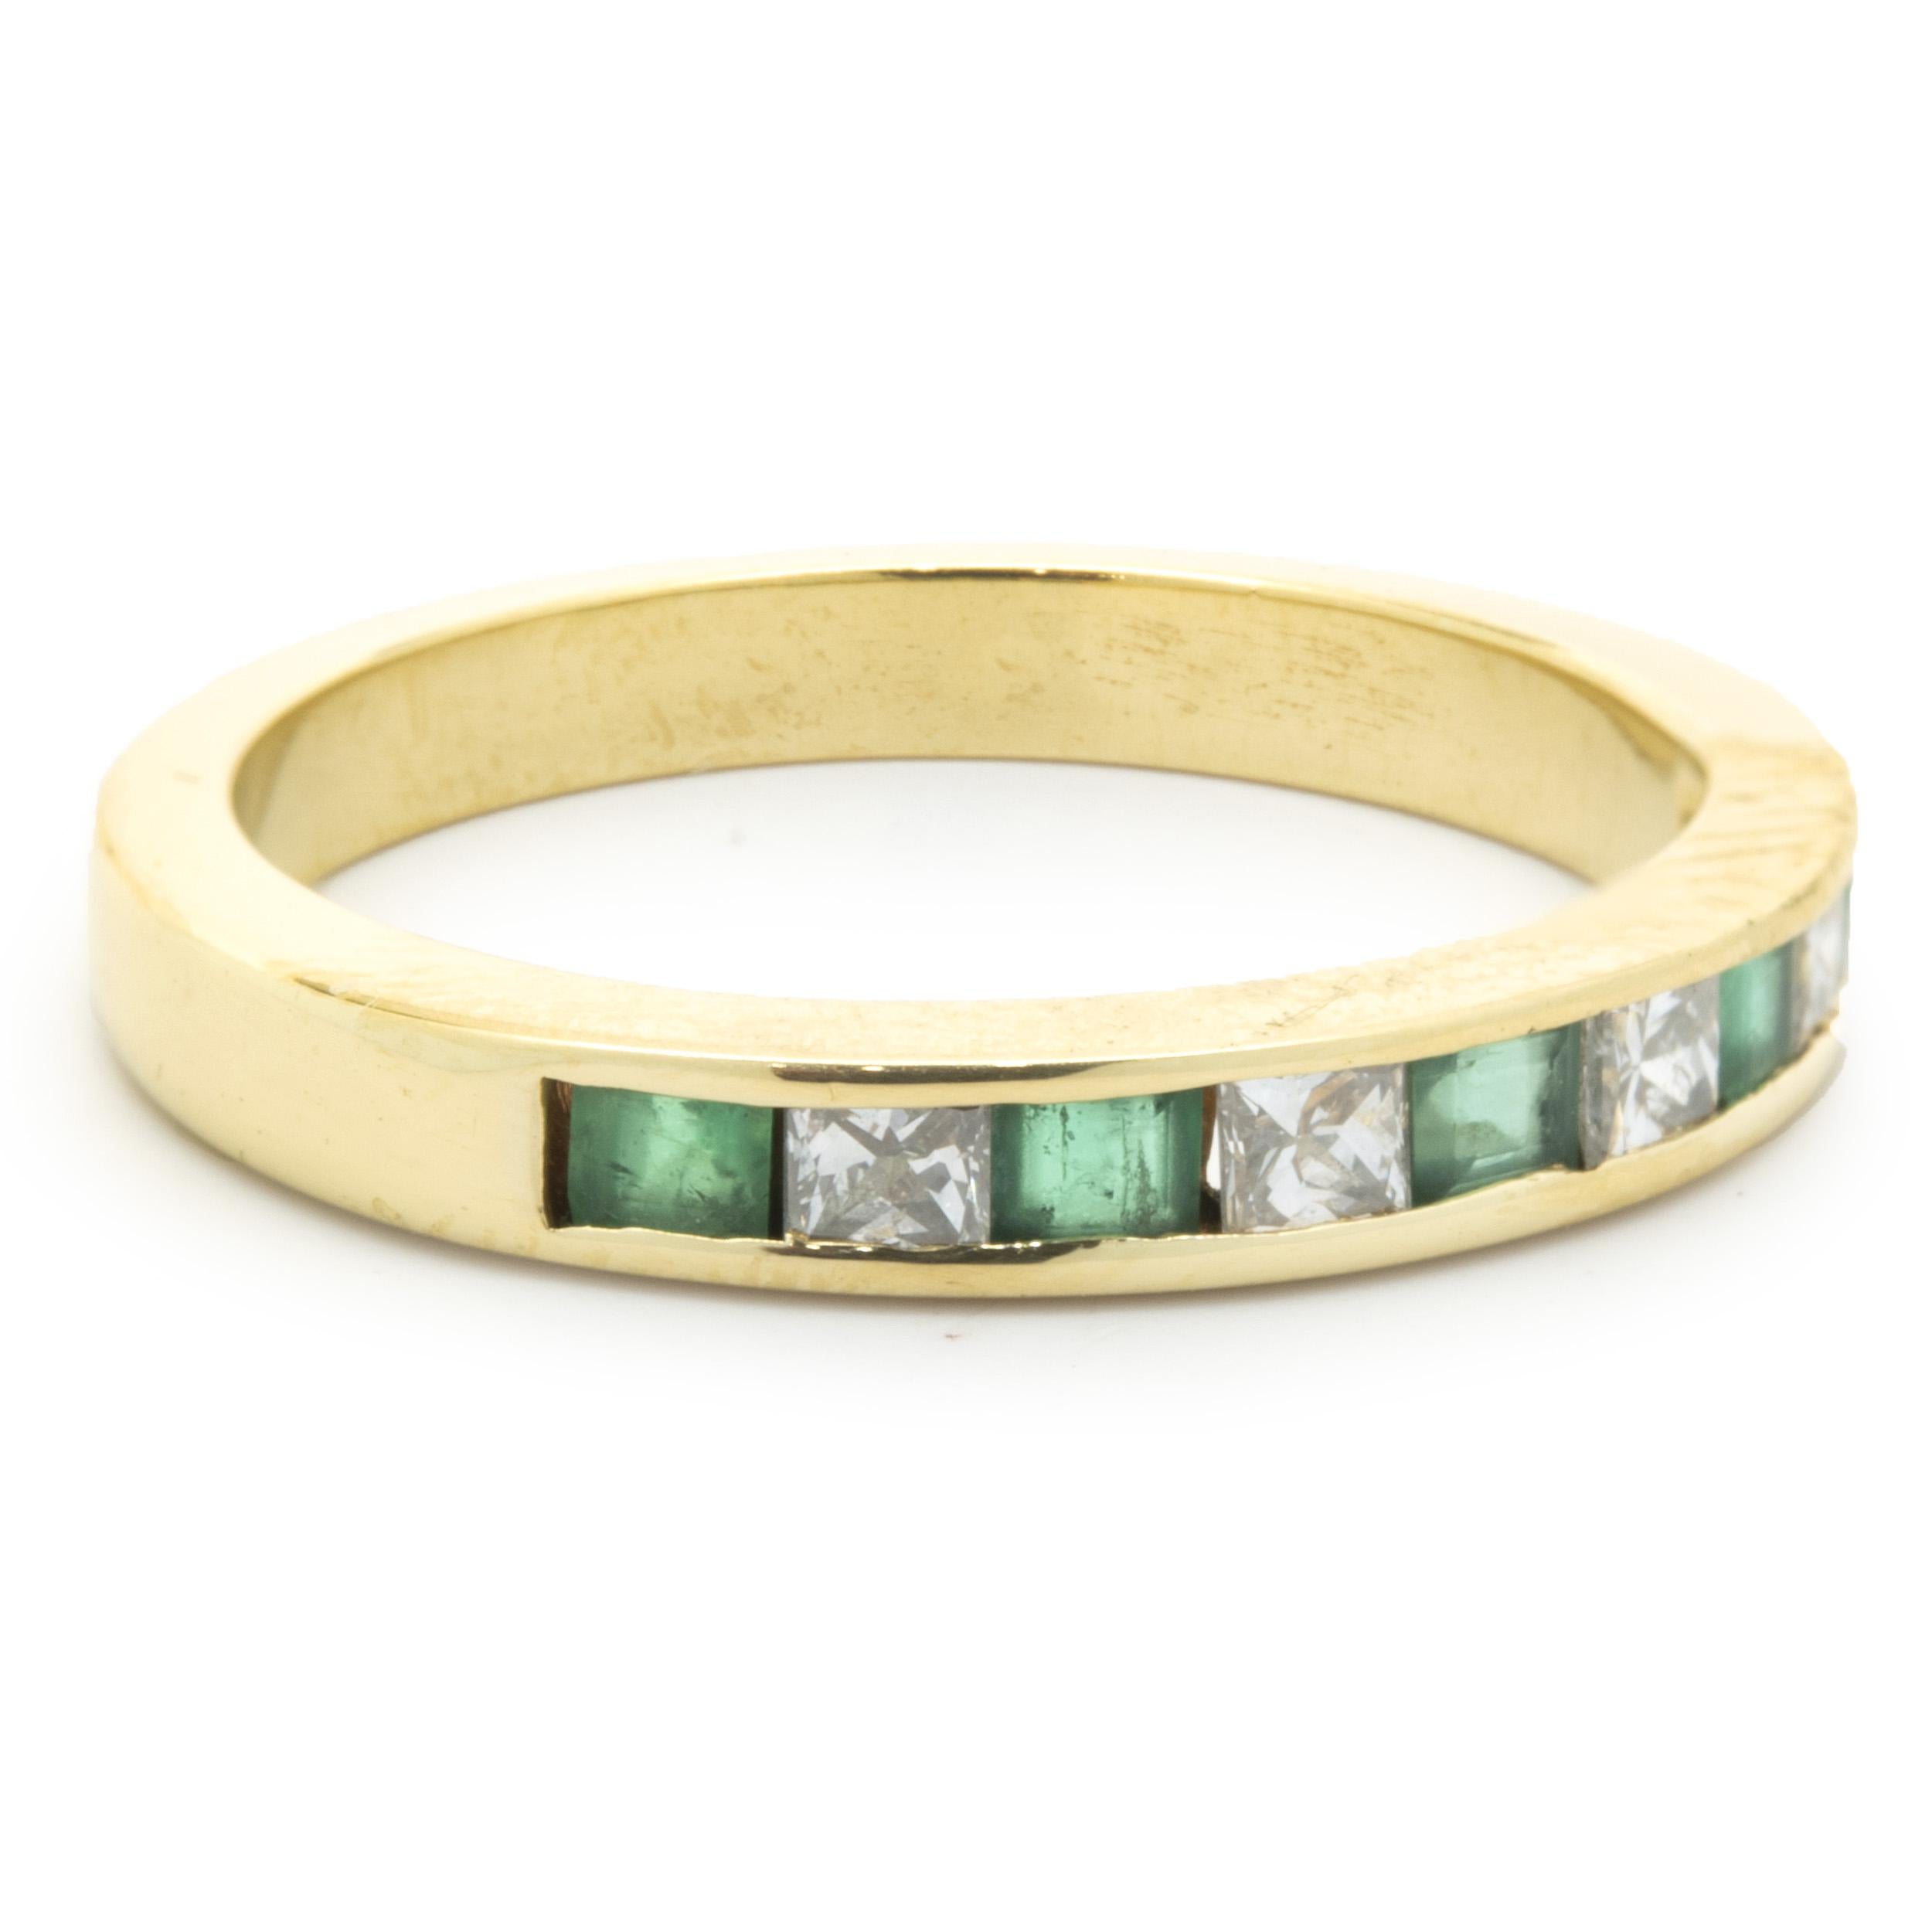 18 Karat Yellow Gold Alternating Diamond and Emerald Band In Excellent Condition For Sale In Scottsdale, AZ